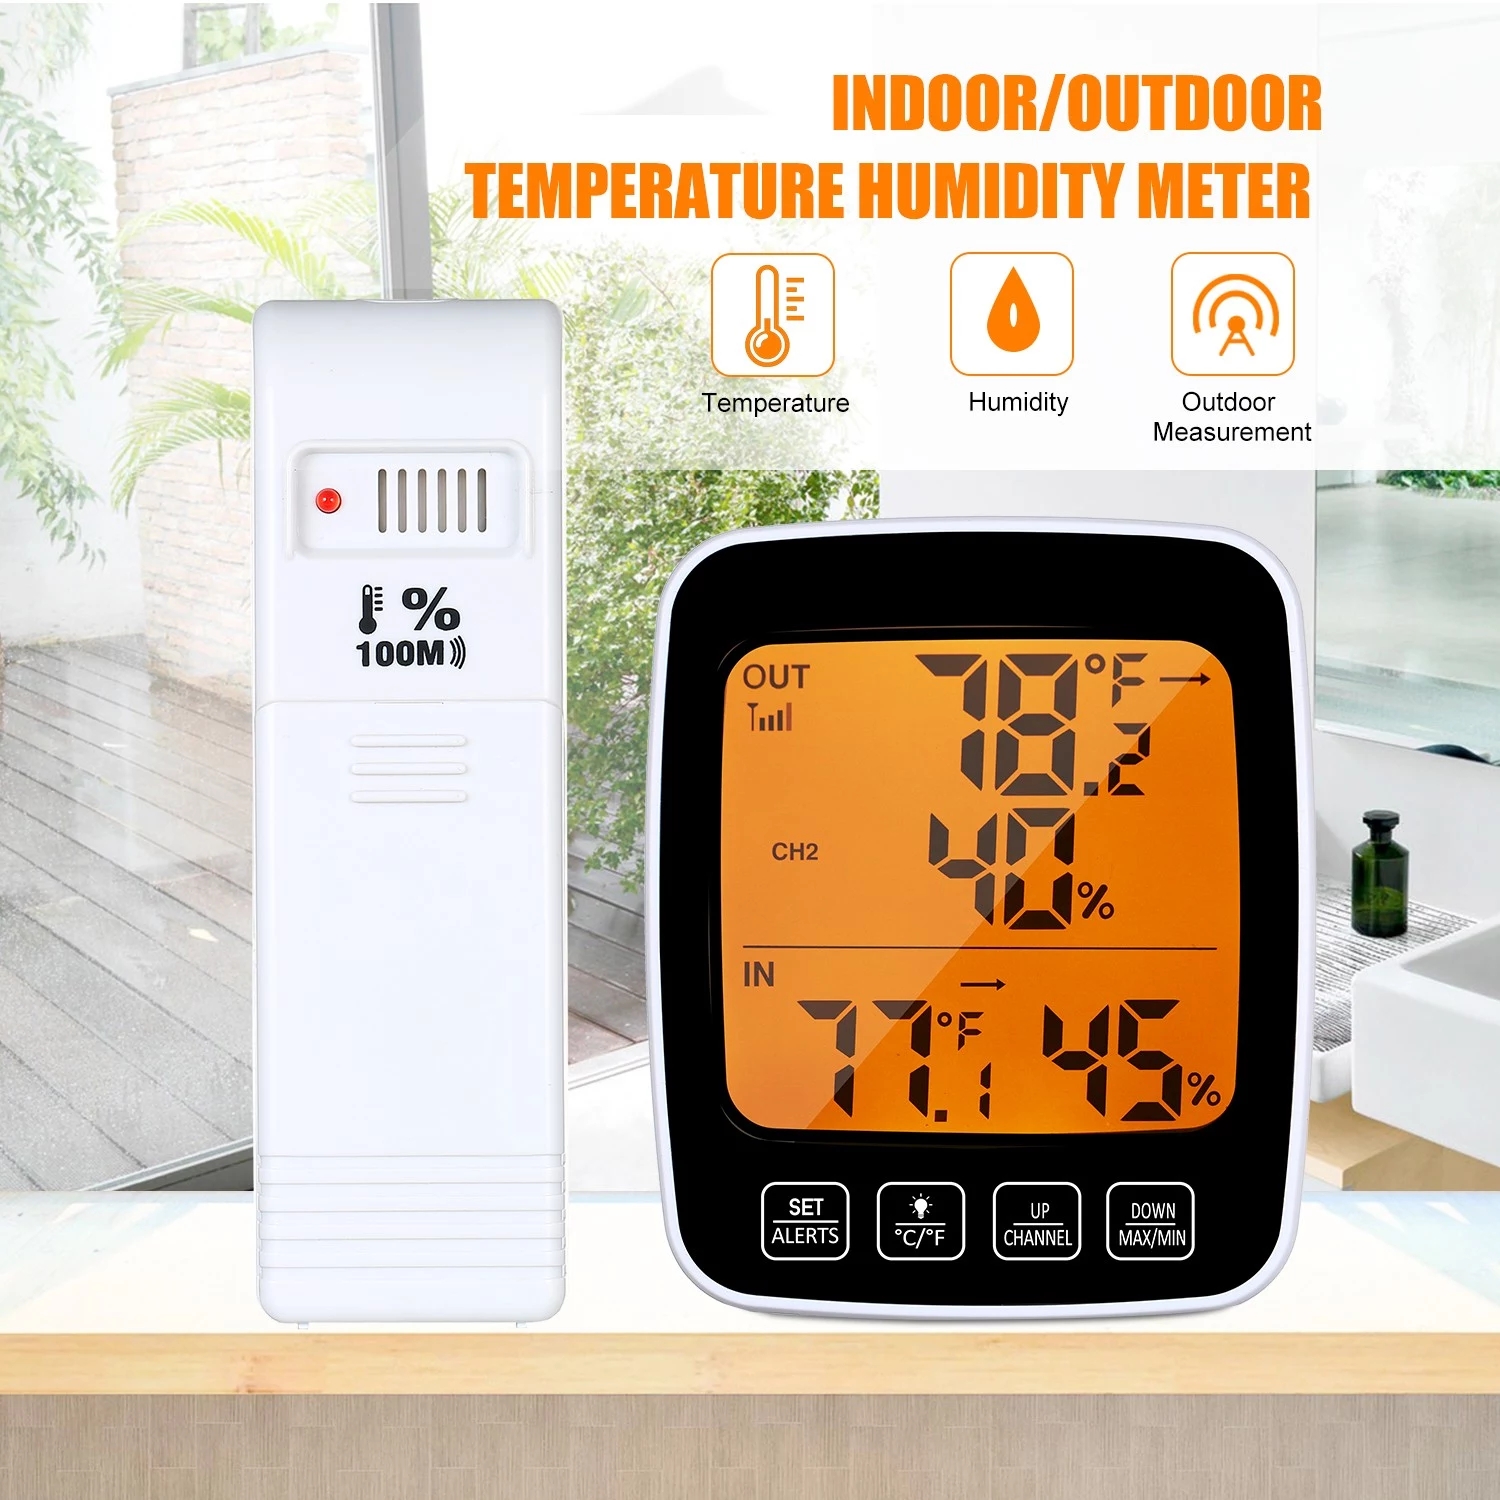 Digital-Temperature--Humidity-Meter-Thermo-hygrometer-degCdegF-Thermometer-Hygrometer-1616470-1